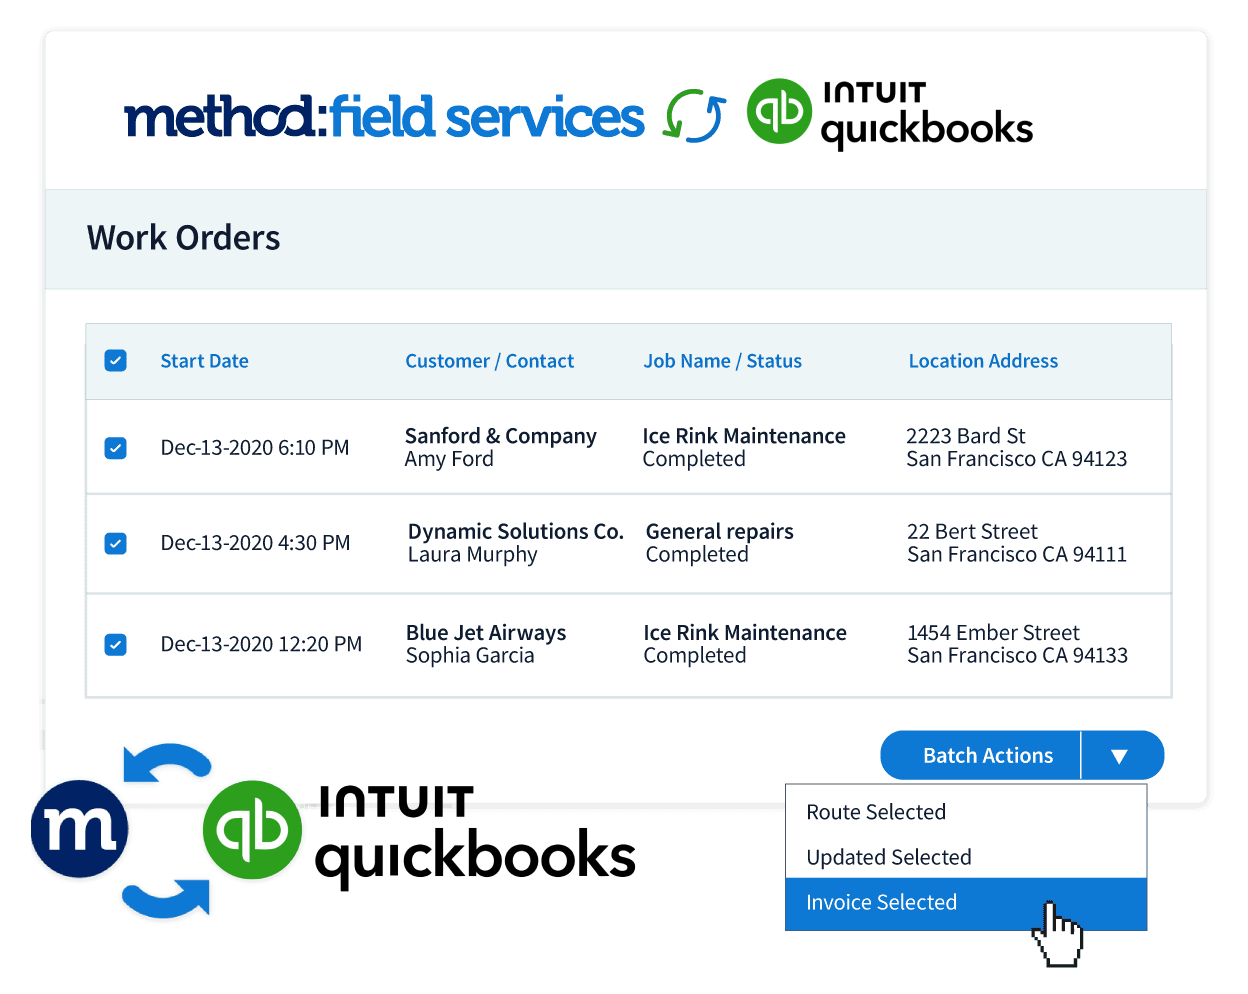 A graphic showing the sync between Method:Field Services and QuickBooks